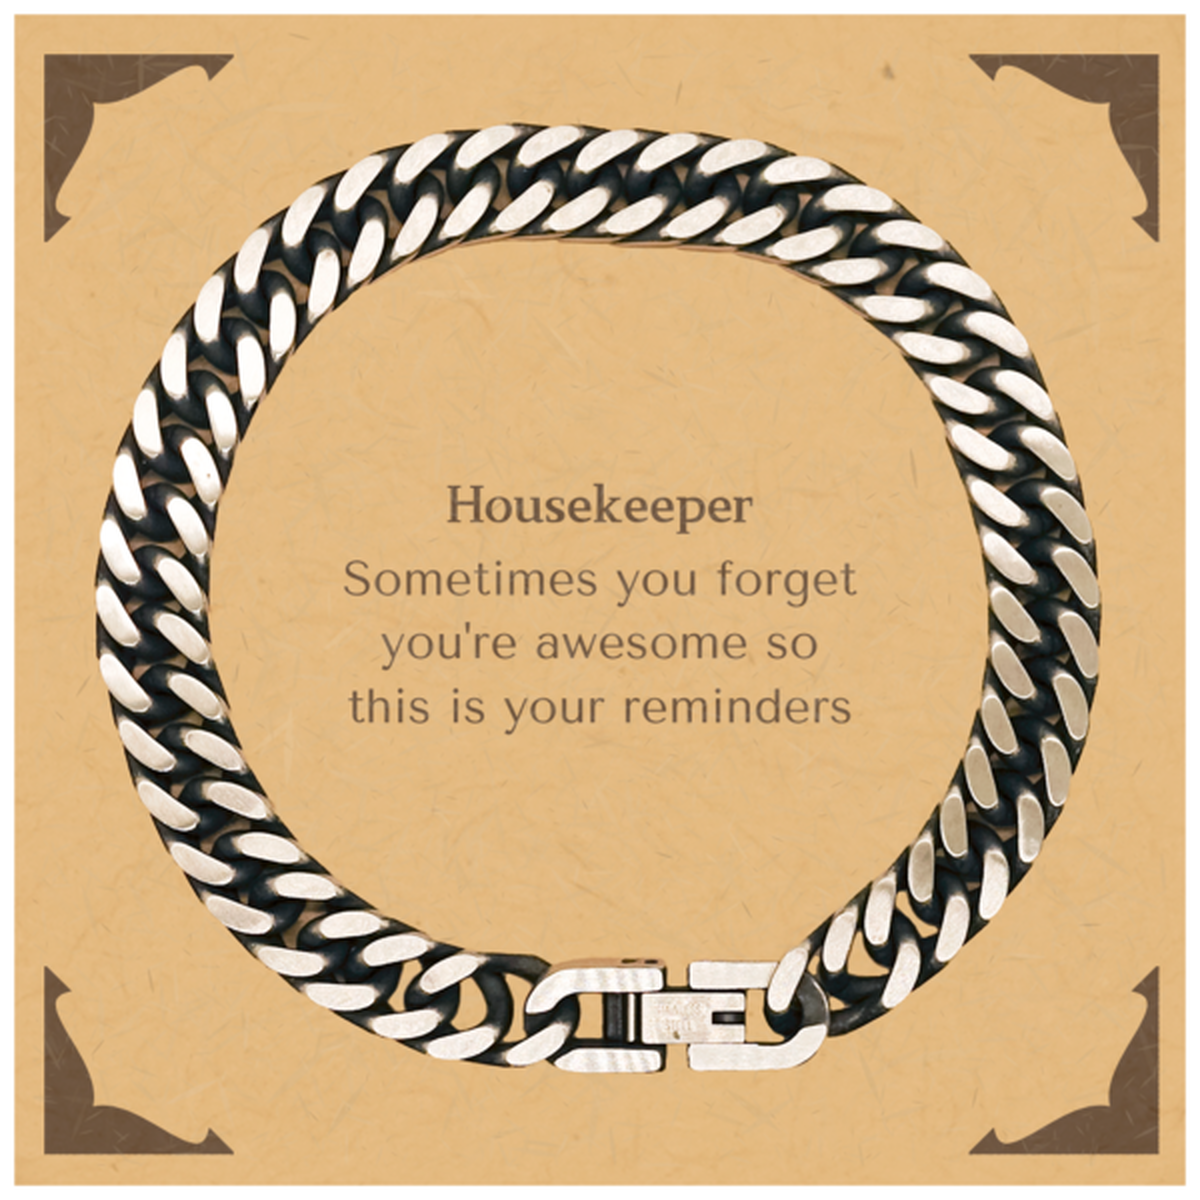 Sentimental Housekeeper Cuban Link Chain Bracelet, Housekeeper Sometimes you forget you're awesome so this is your reminders, Graduation Christmas Birthday Gifts for Housekeeper, Men, Women, Coworkers